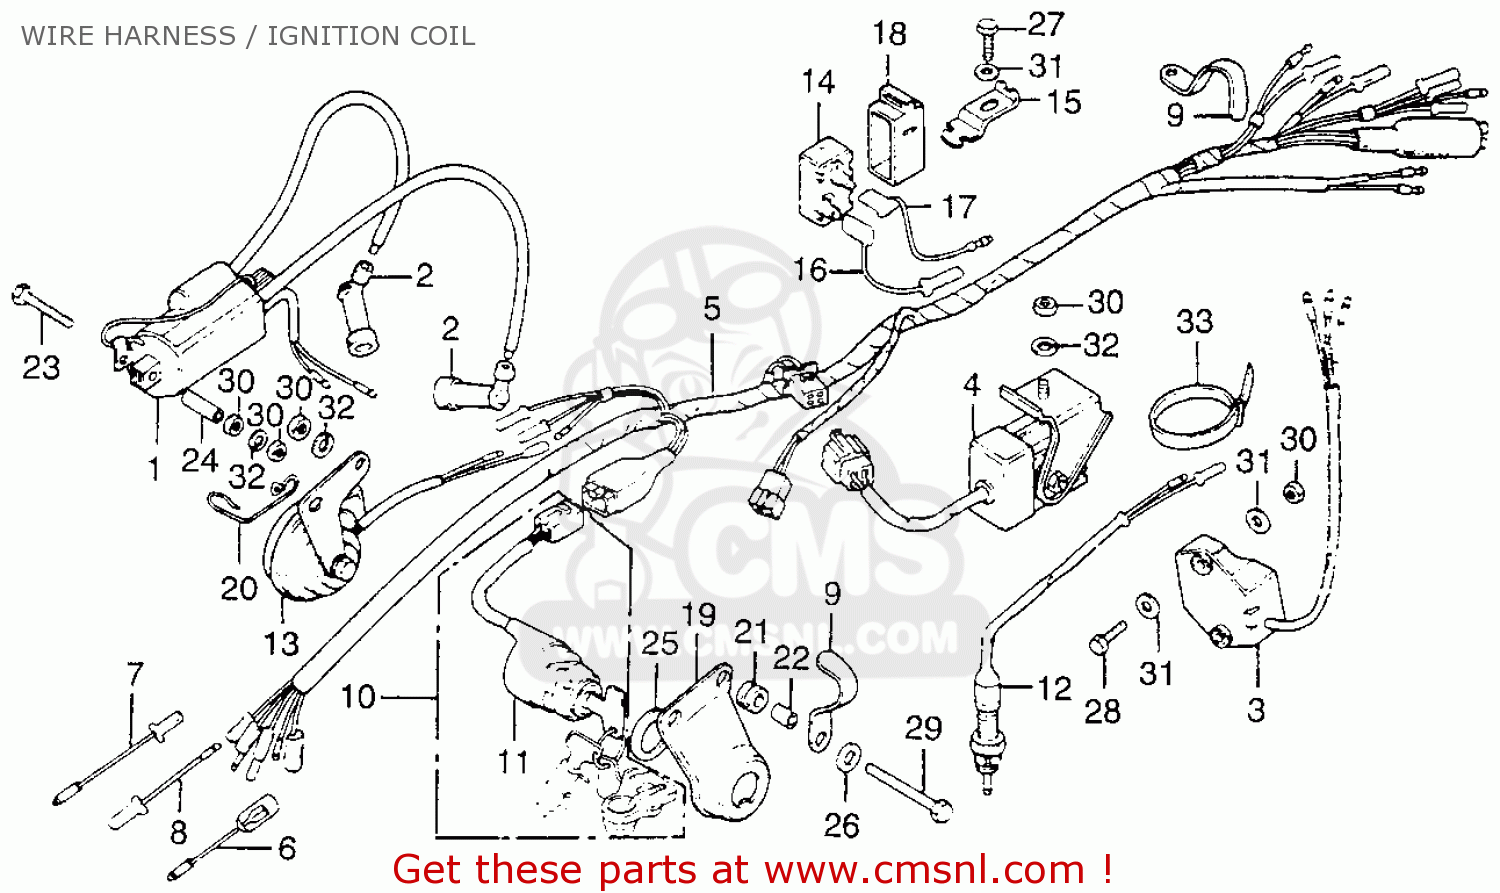 Honda CB200T 1975 USA WIRE HARNESS / IGNITION COIL - buy ... yamaha vmax 600 wiring diagram 